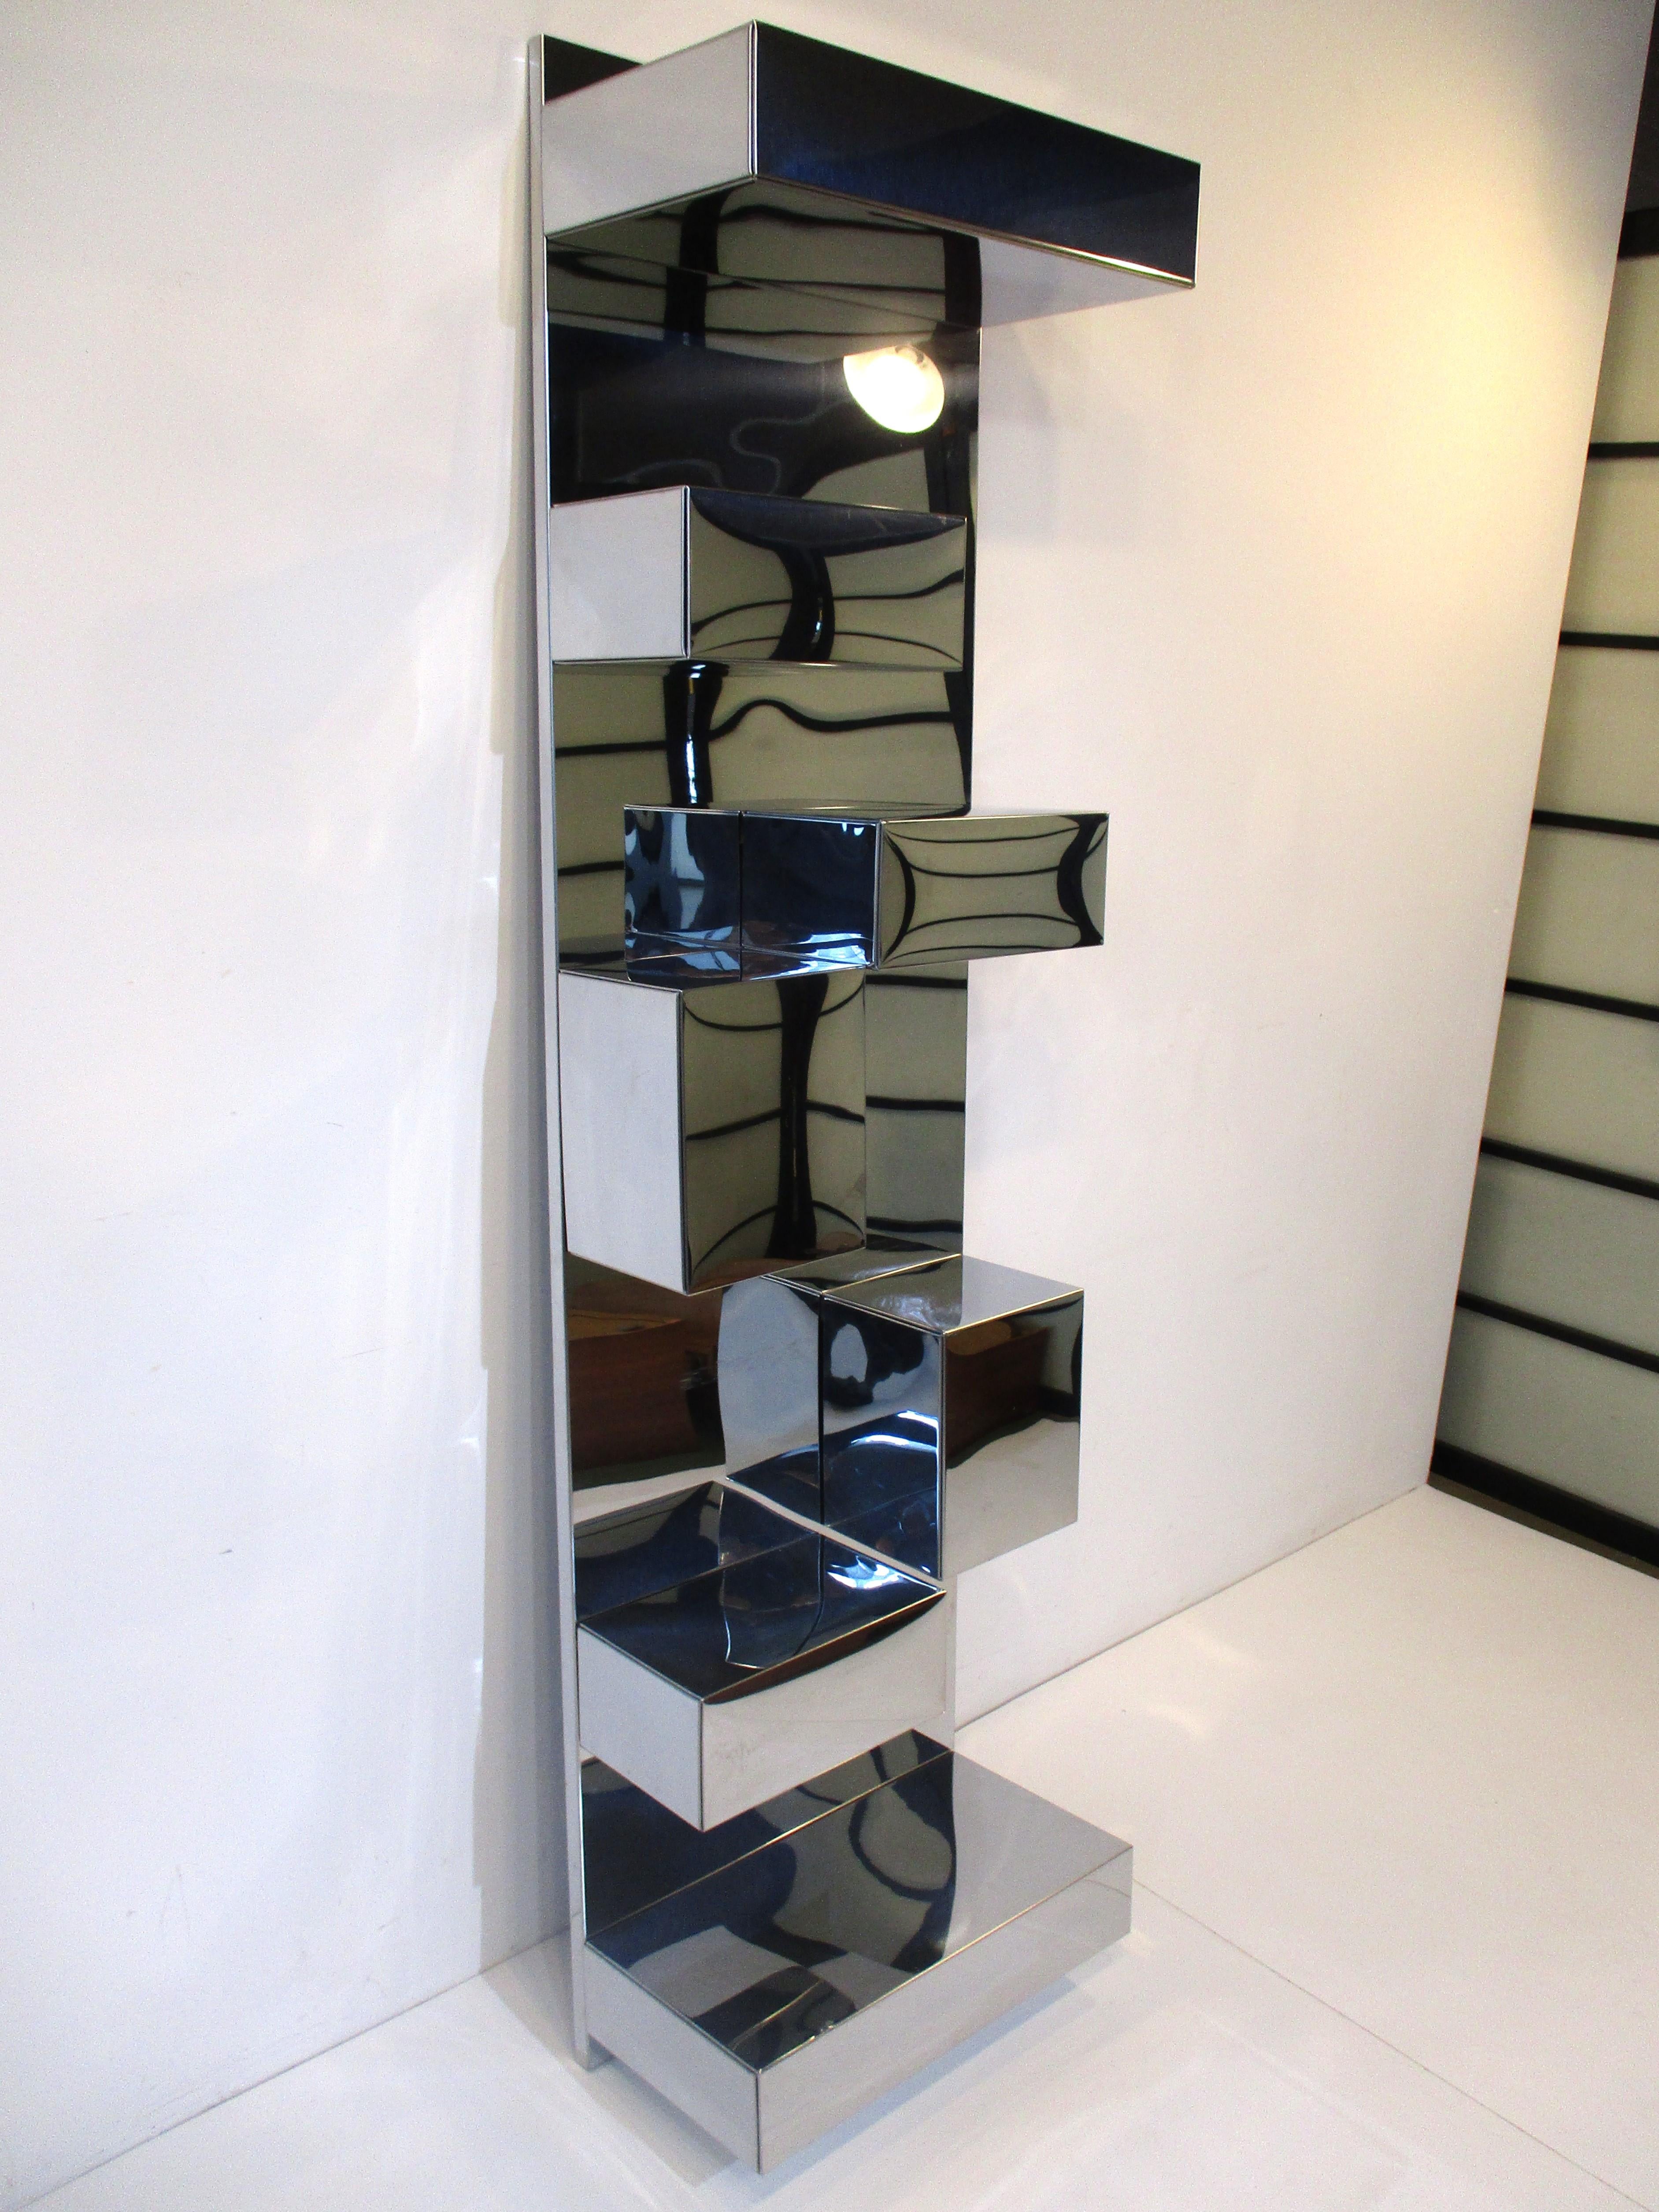 A very well crafted wall mounted shelving unit with seven removable box shelves and wall backing panel. The backing piece is wood and has polished stainless formed over it, this piece is attached to the wall. The horizontal box shelves slip over